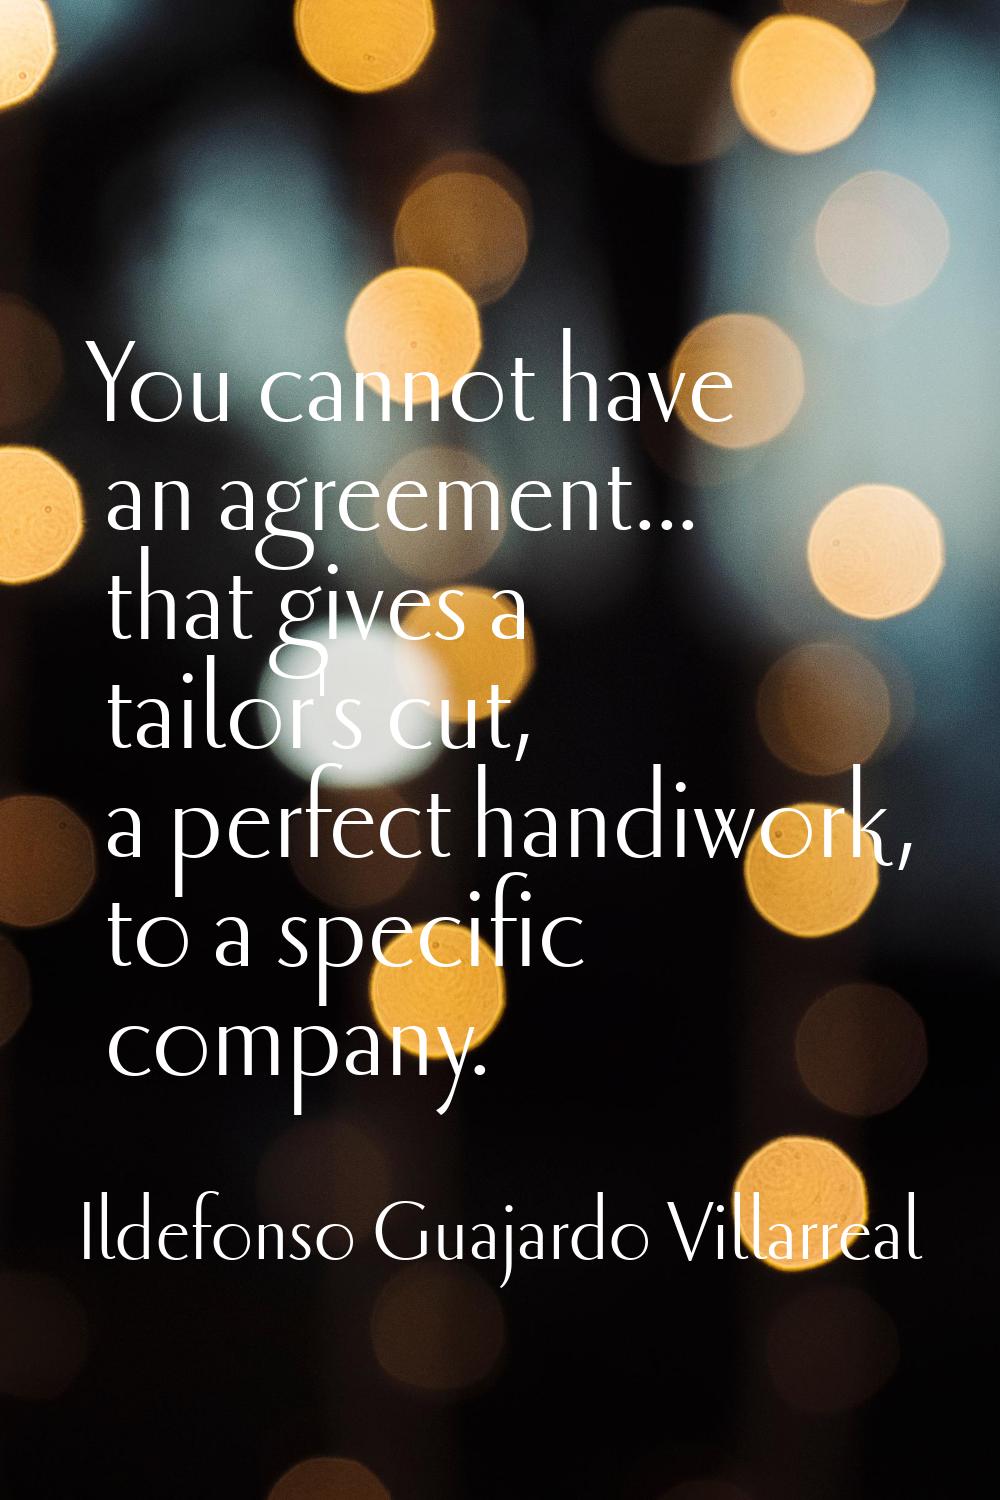 You cannot have an agreement... that gives a tailor's cut, a perfect handiwork, to a specific compa